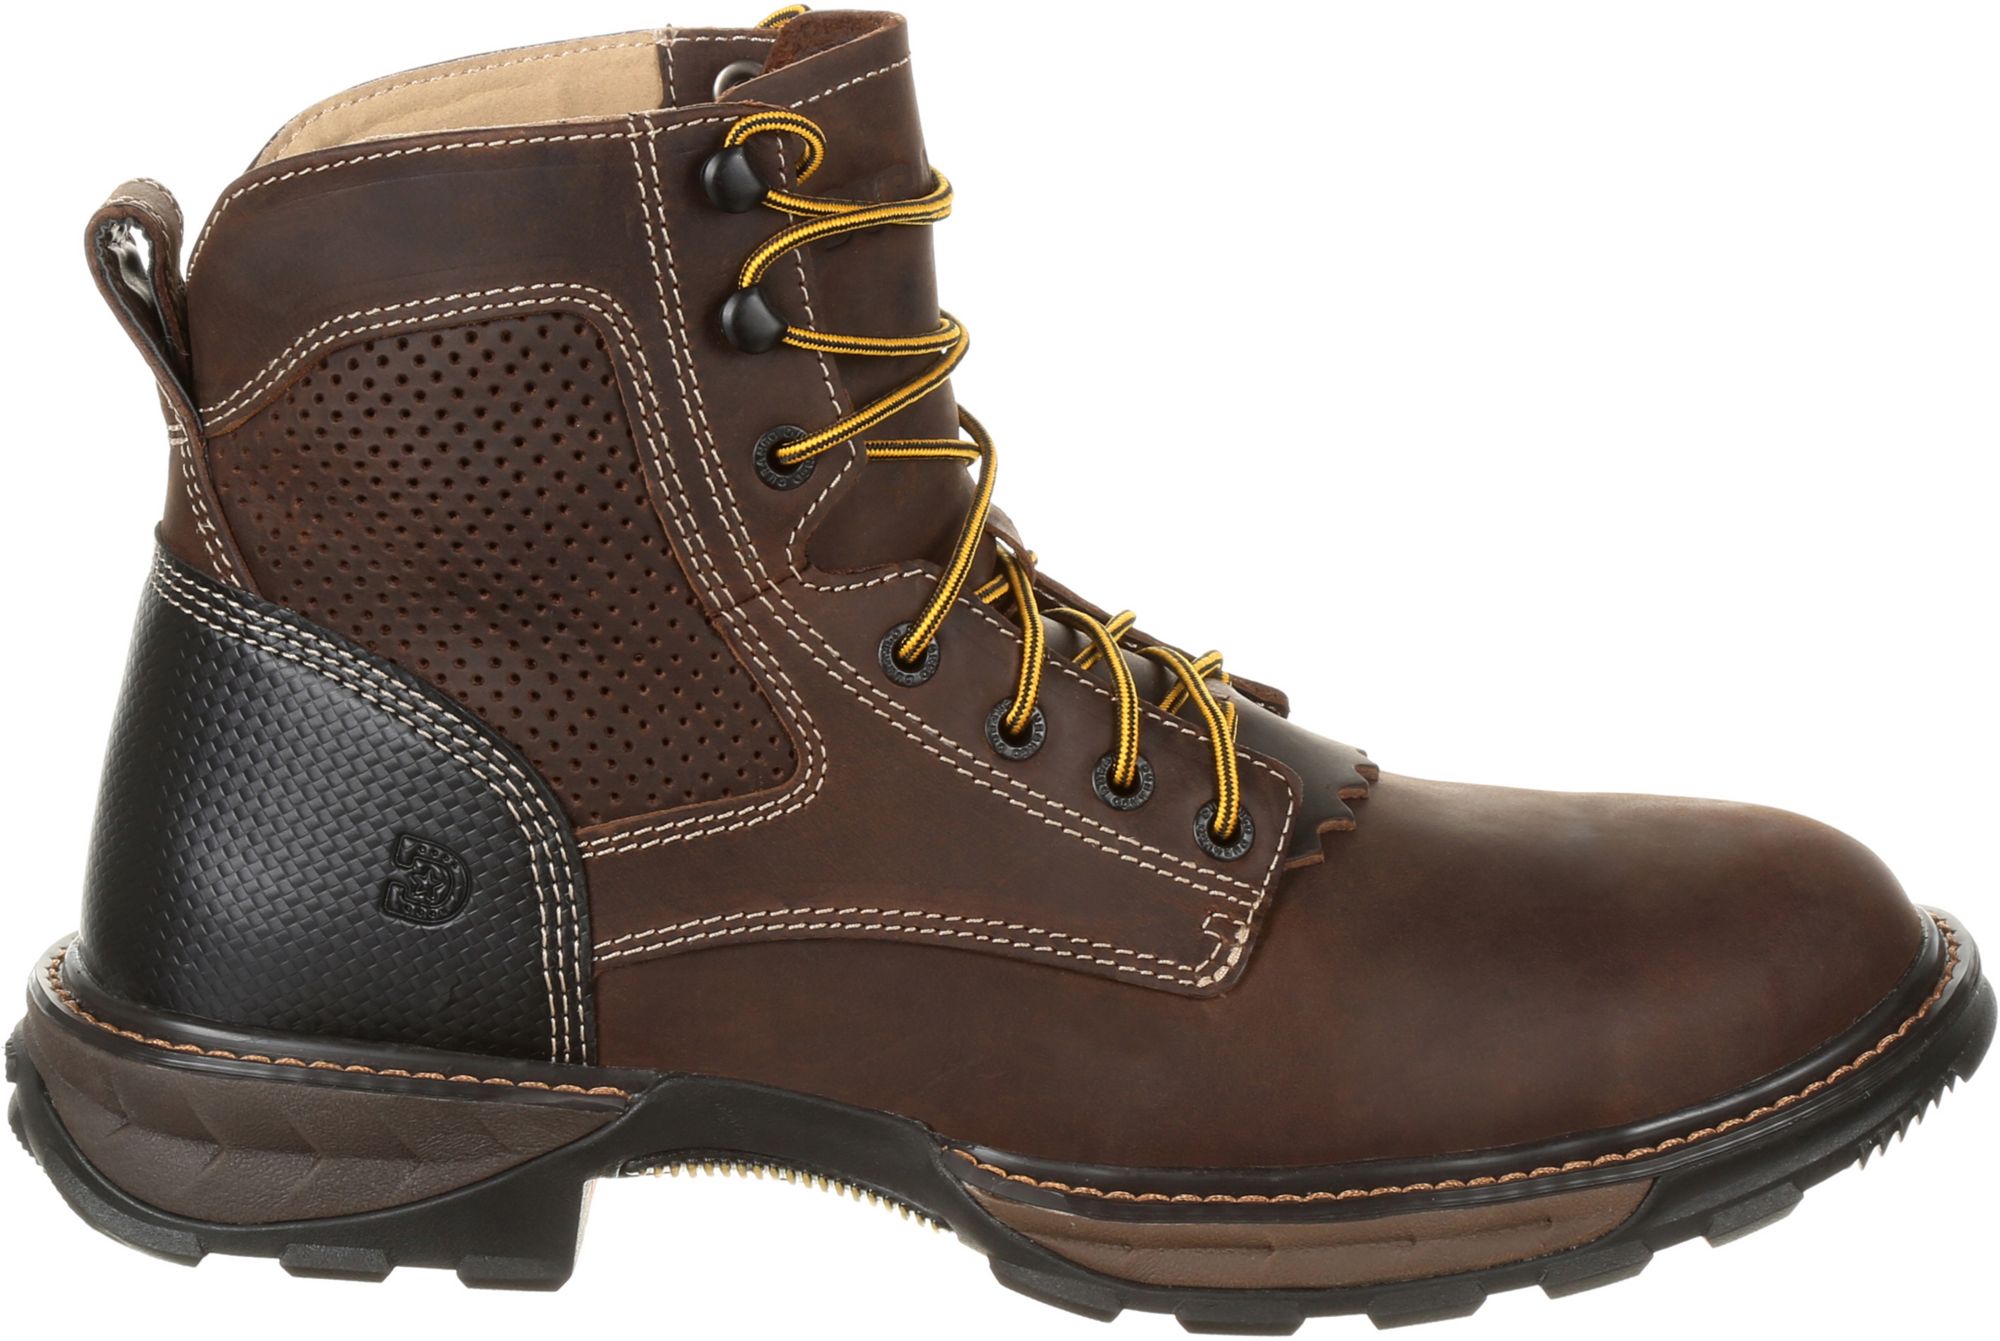 ventilated steel toe shoes